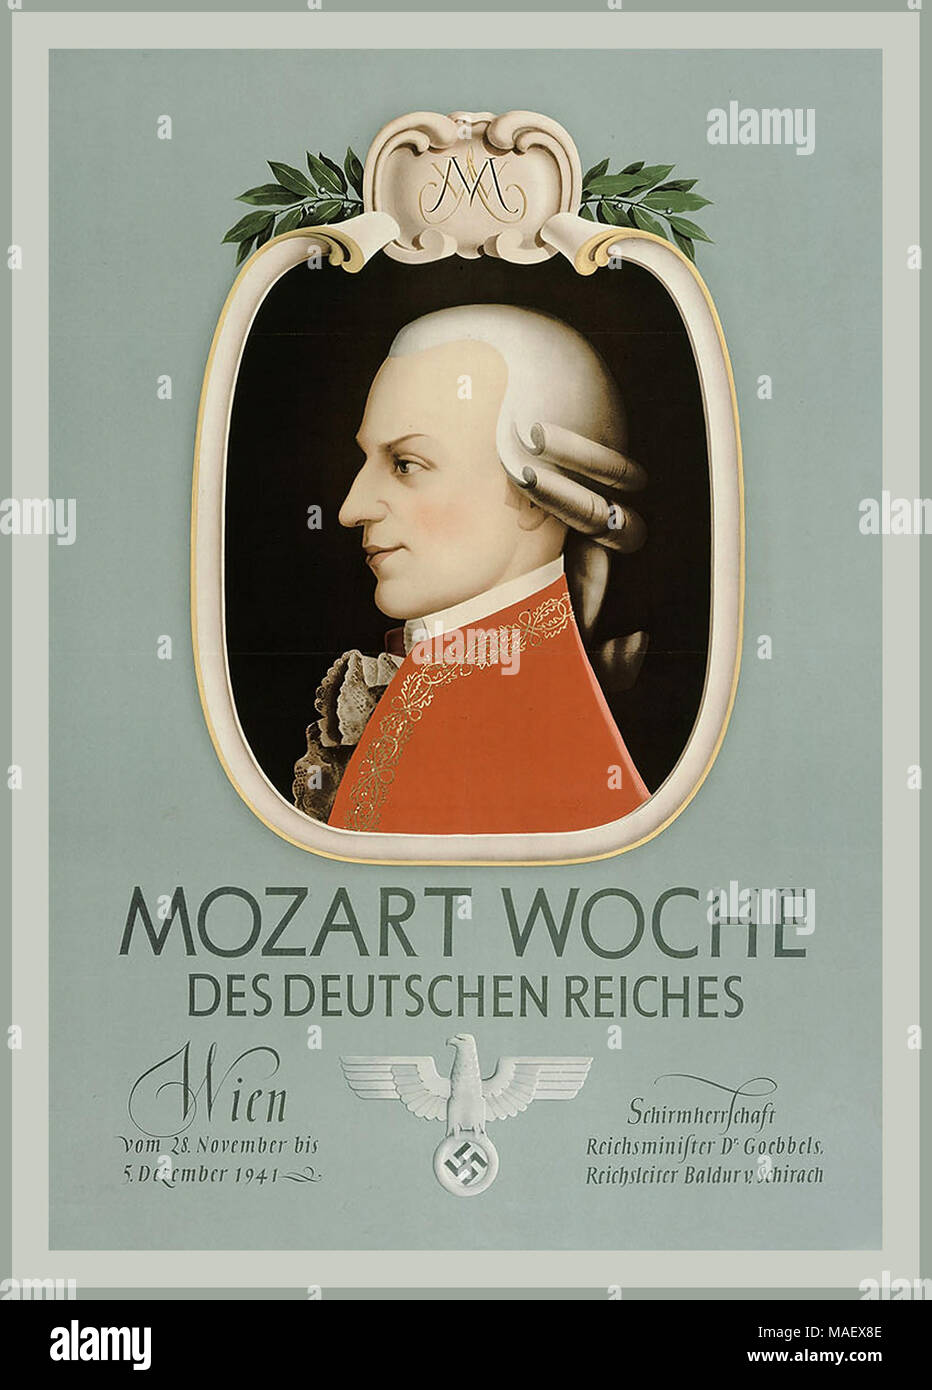 WW2 Nazi Vintage ‘Mozart Woche’ Music Performance Poster with Swastika  1941 Mozart Week of the German Reich. Vienna, Austria from 28 November to 5 December 1941; Patronage Minister of the Reich Dr. Goebbels, Reichsleiter Baldur v. Schirach  Third Reich promoted Mozart's music to further the ambitions of the Nazi regime Stock Photo